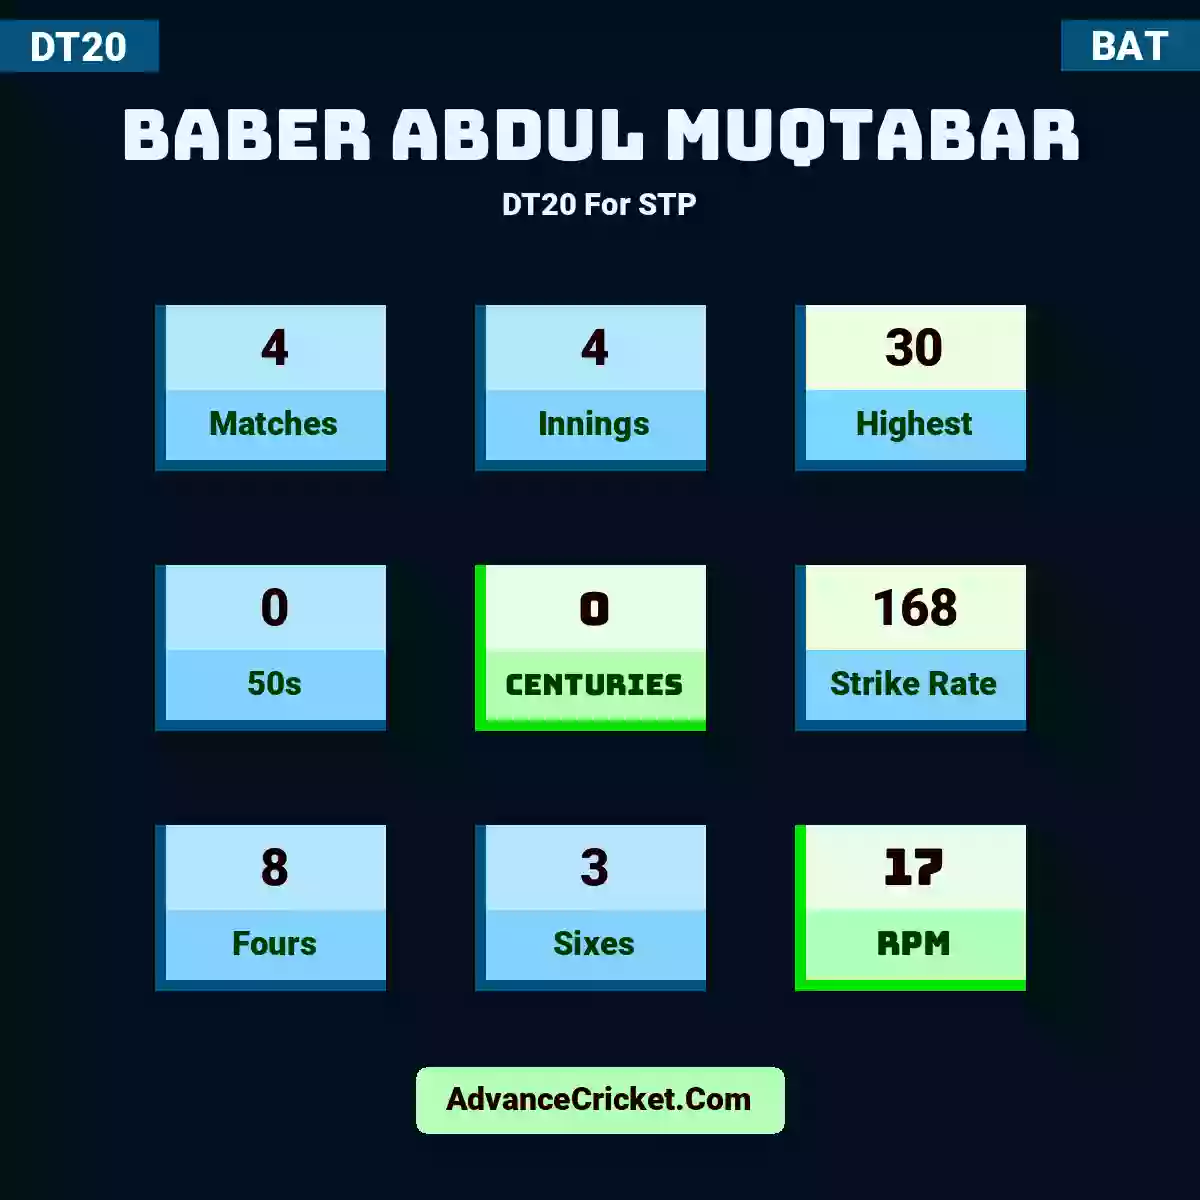 Baber Abdul Muqtabar DT20  For STP, Baber Abdul Muqtabar played 4 matches, scored 30 runs as highest, 0 half-centuries, and 0 centuries, with a strike rate of 168. B.Abdul.Muqtabar hit 8 fours and 3 sixes, with an RPM of 17.